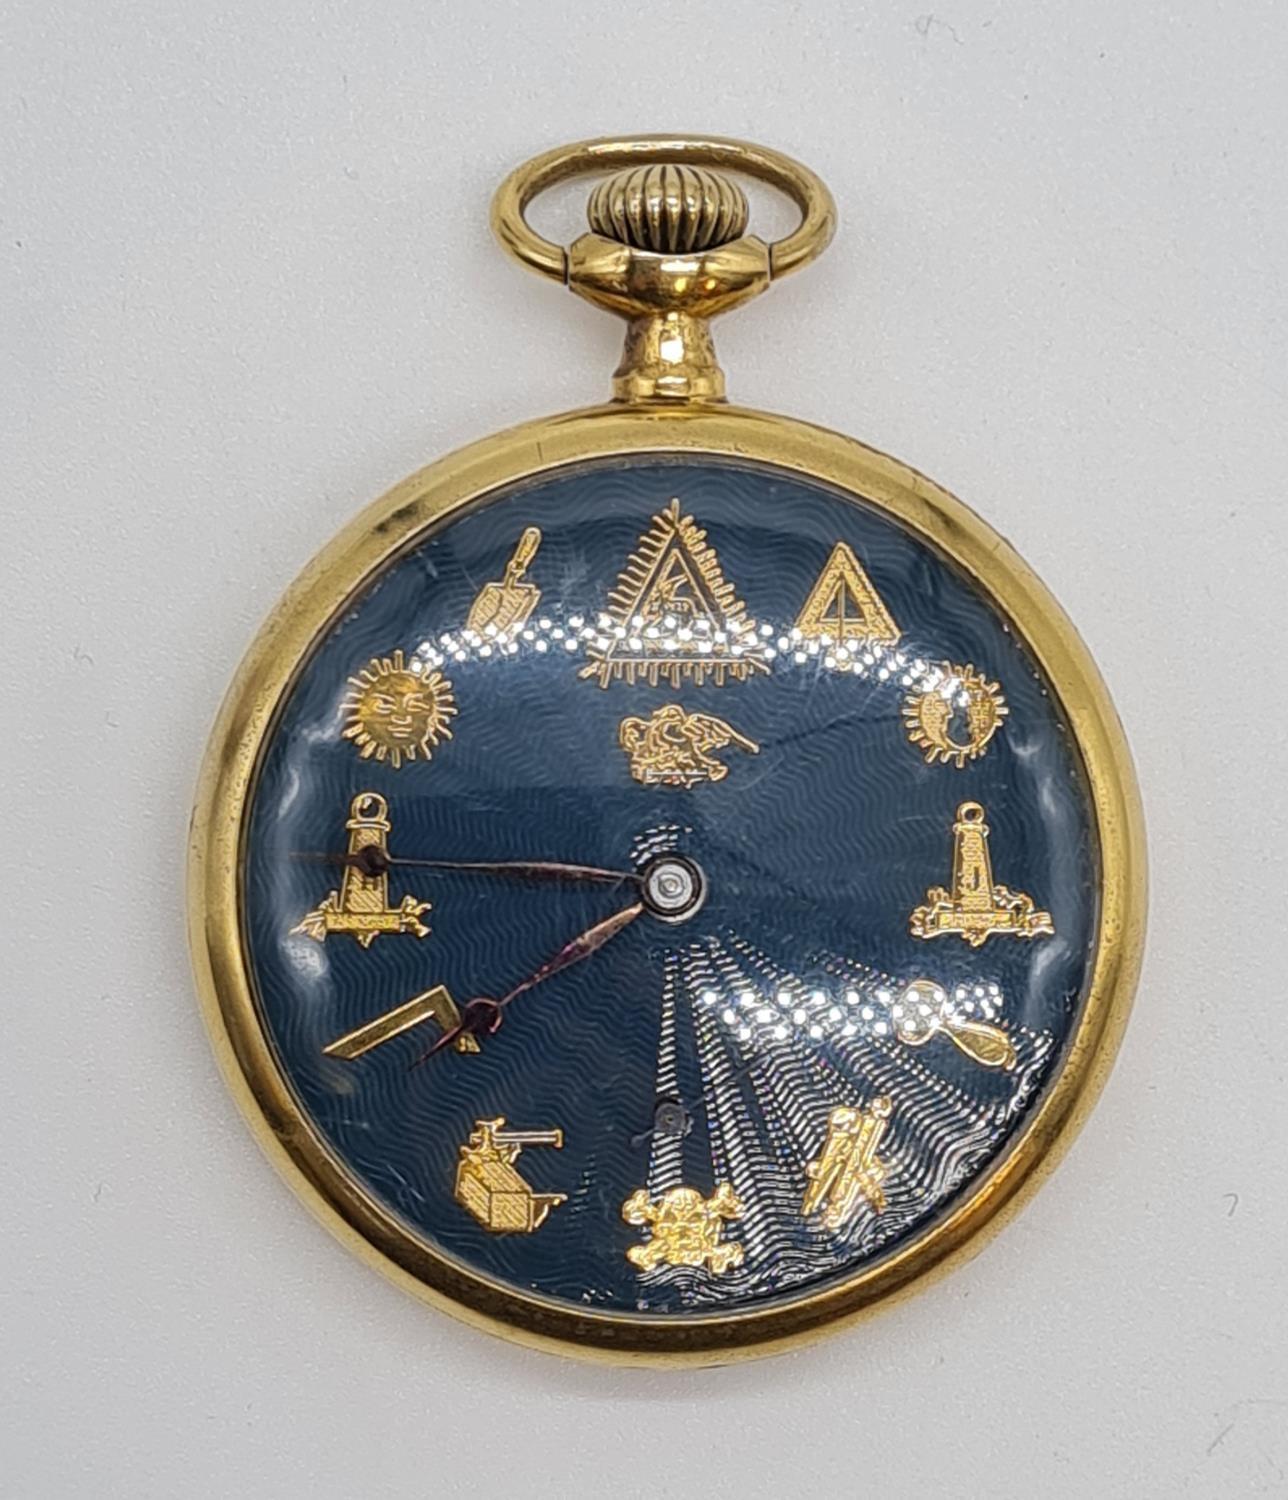 Omega Masonic Pocket Watch with rare Blue face, full working order